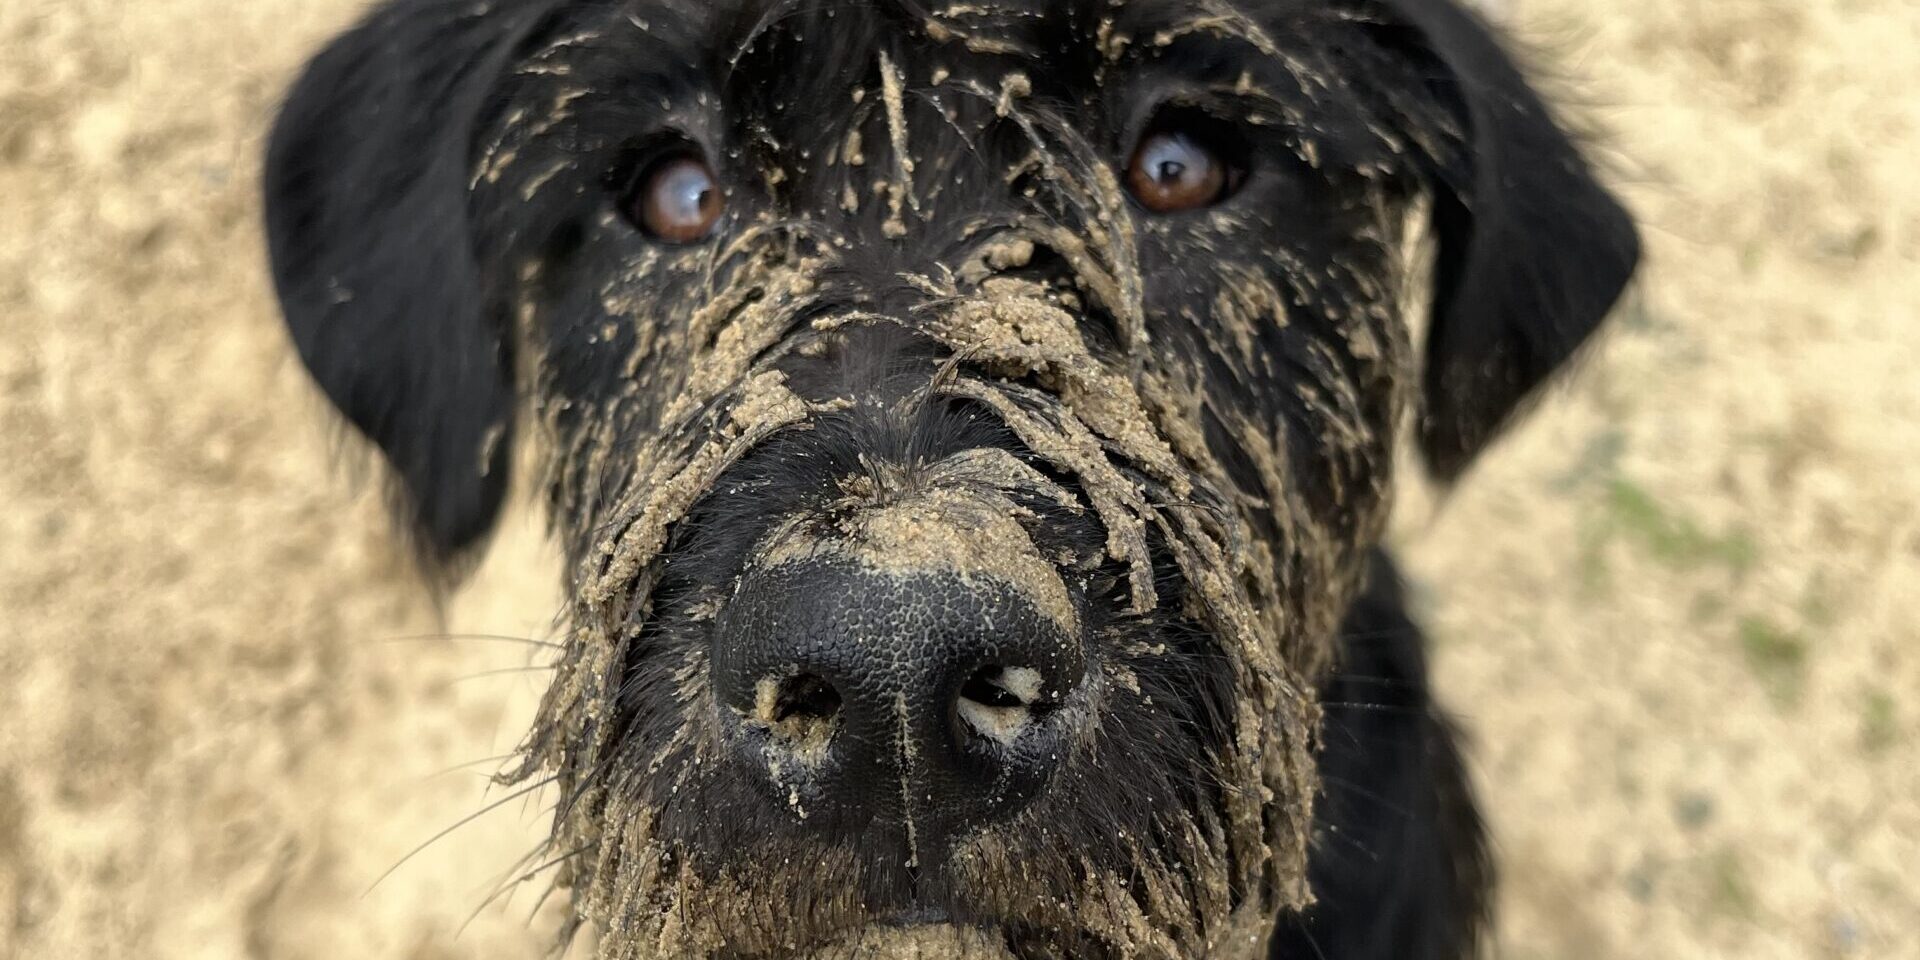 A dog with black hair and sandy dirt on its nose.